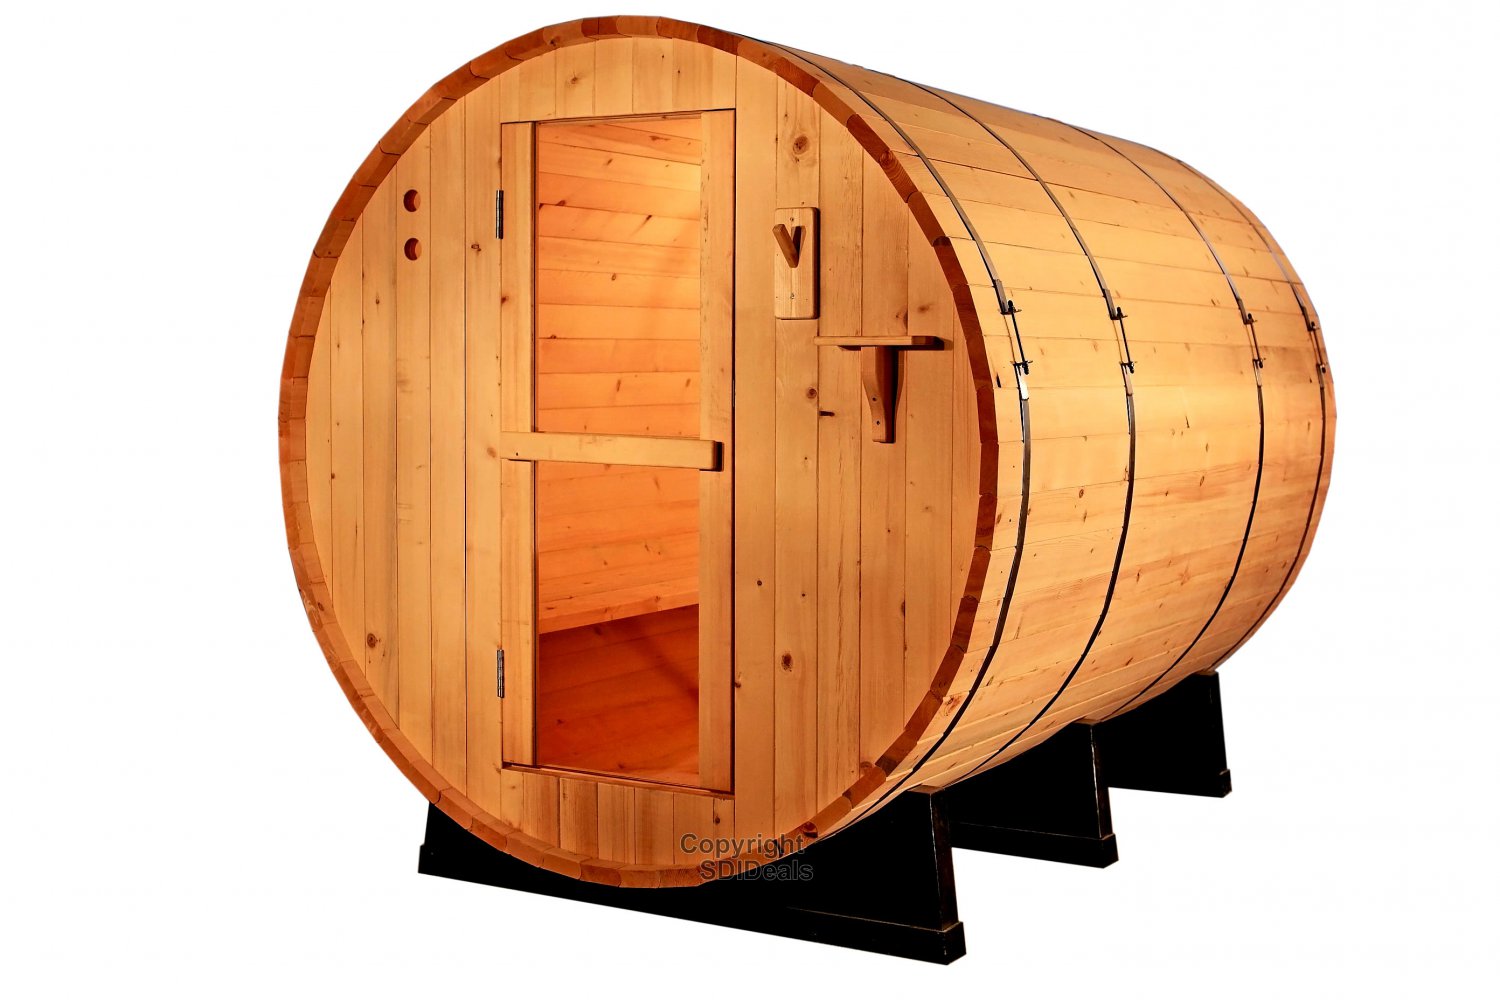 6 Ft Canadian Red Cedar Barrel Sauna Wet Dry Spa 4 Person Size Outdoor